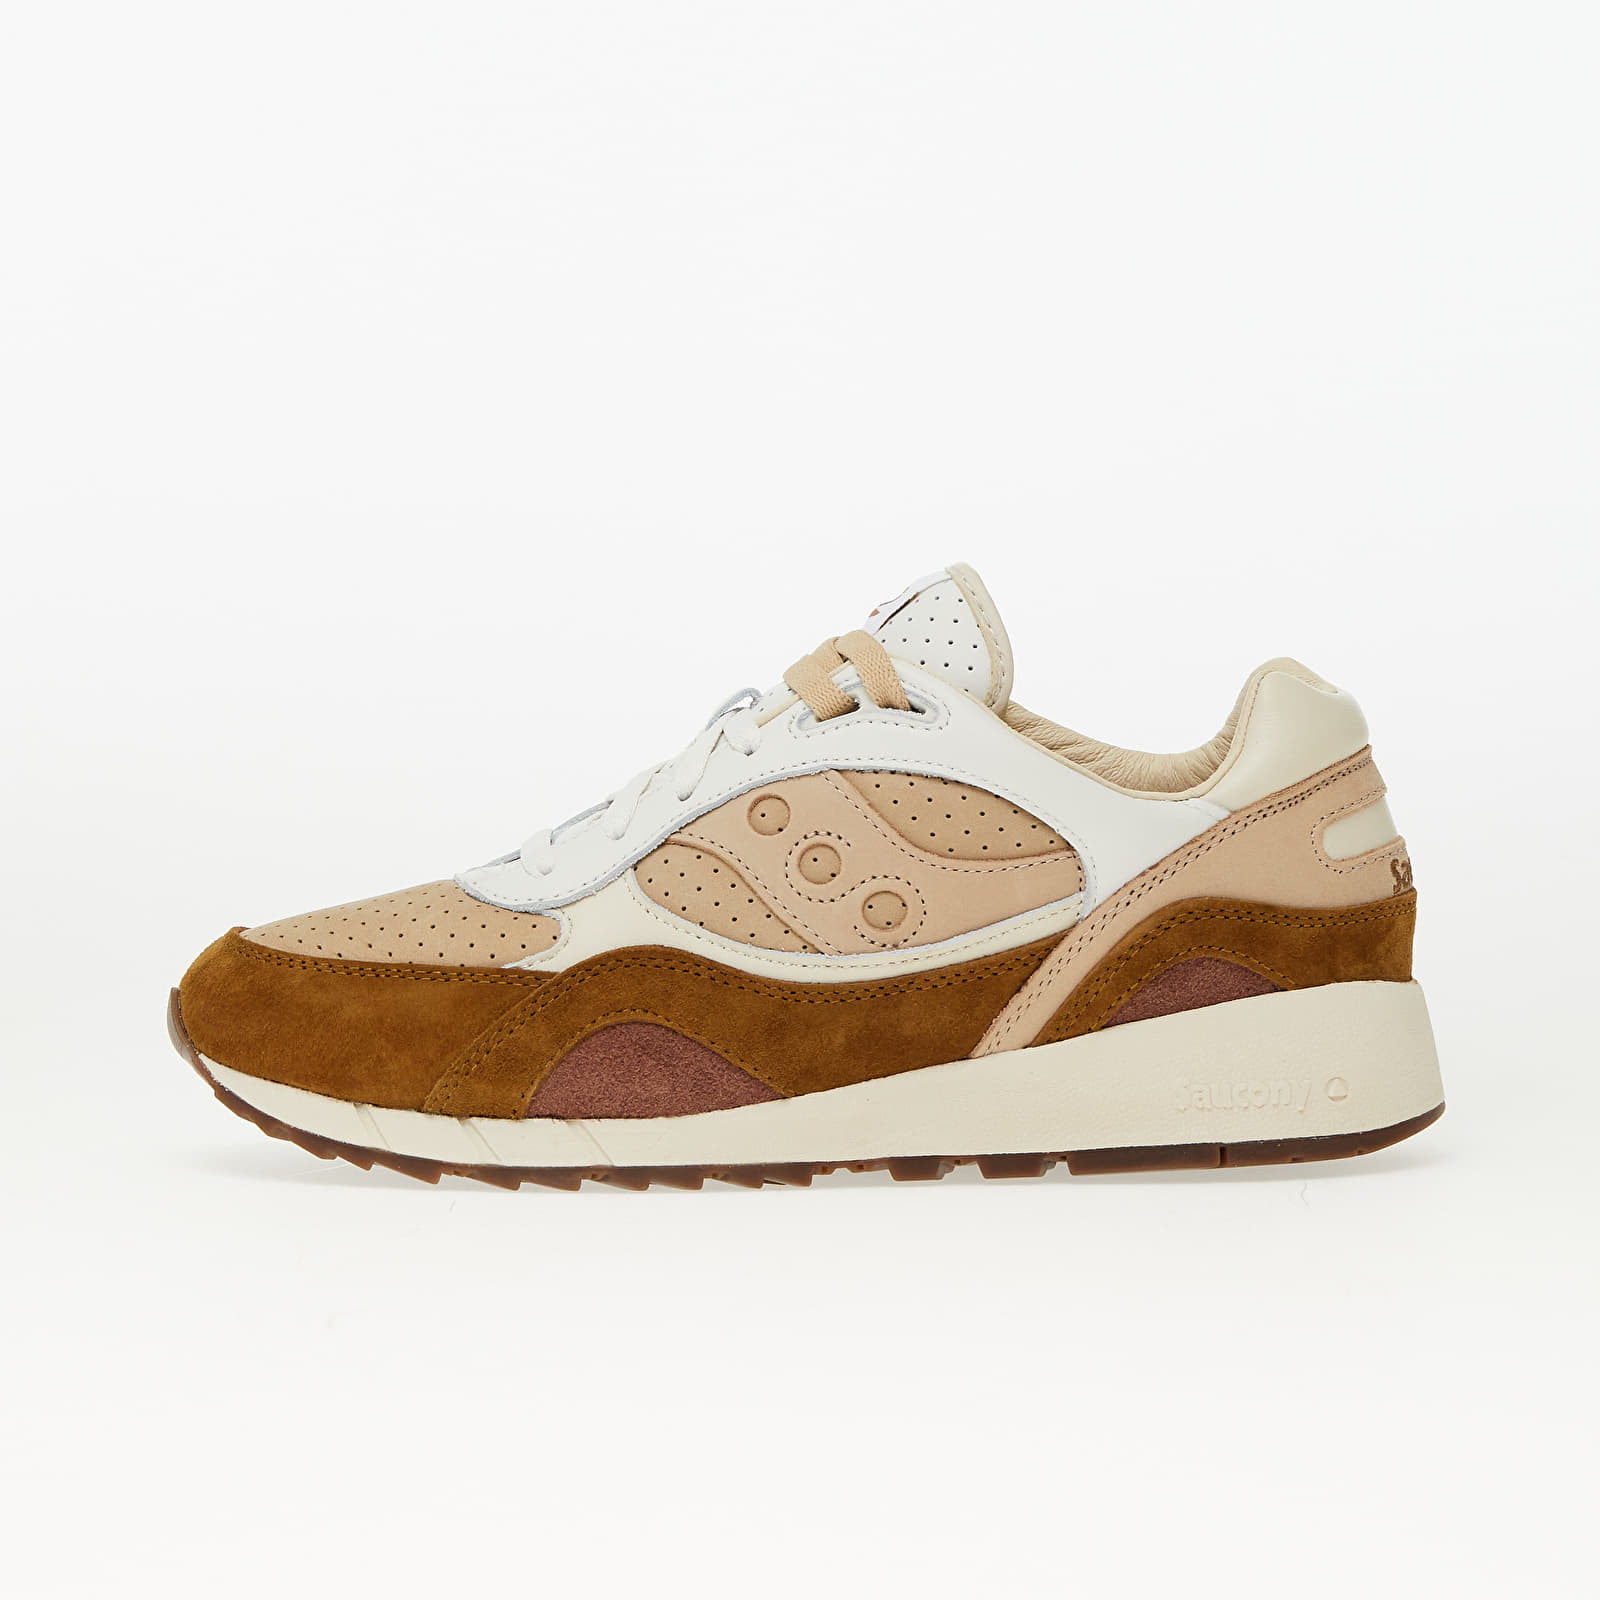 saucony shadow 6000 brown/ white